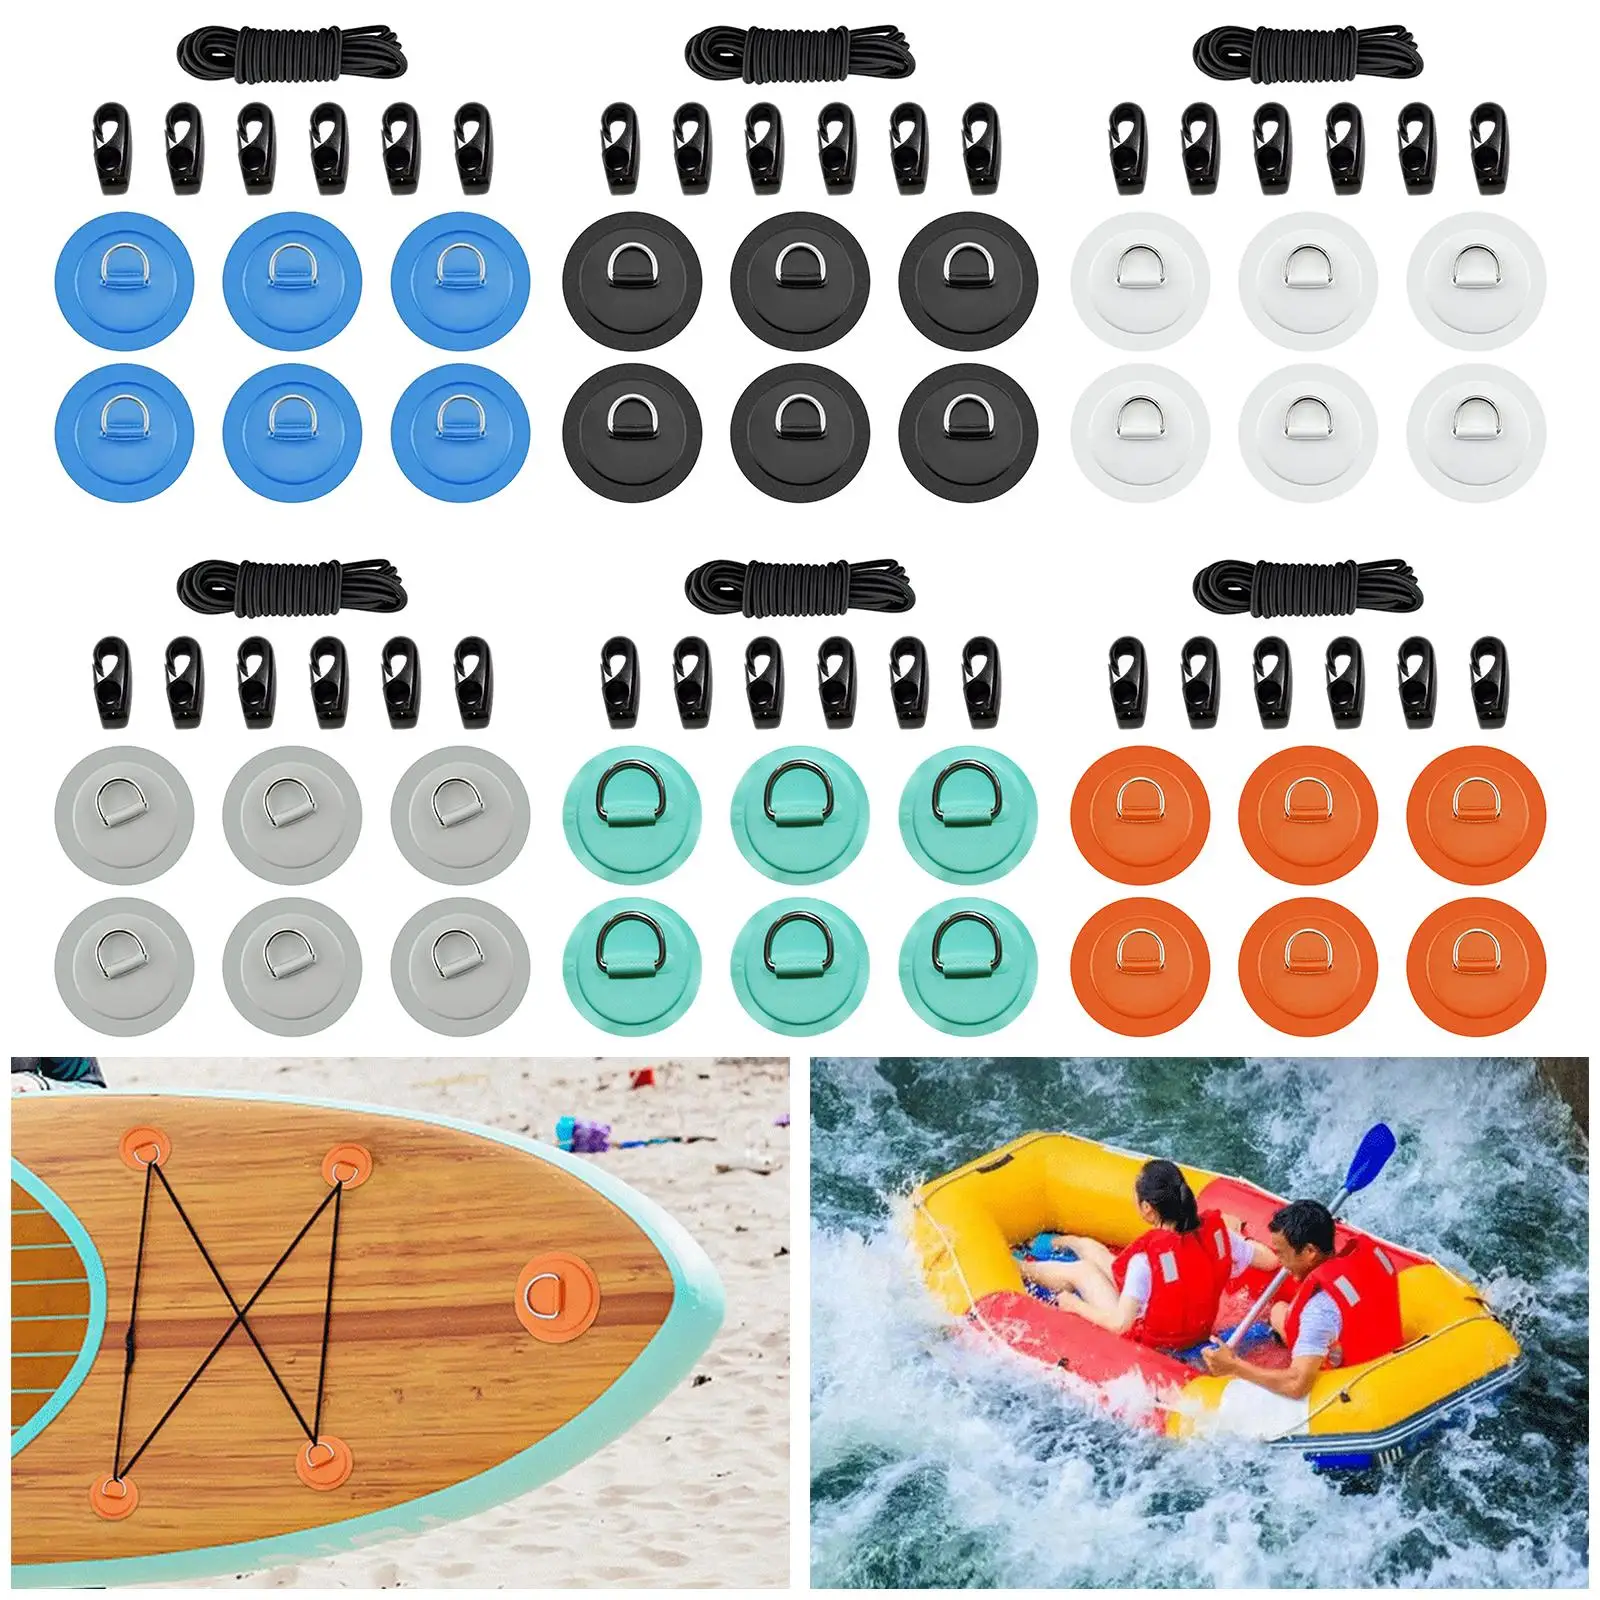 Bungee Deck Kit D Rings Pad Patch for Kayak Canoe Inflatable Boat Fishing Hook Deck Rigging Kit Raft Deck Accessories